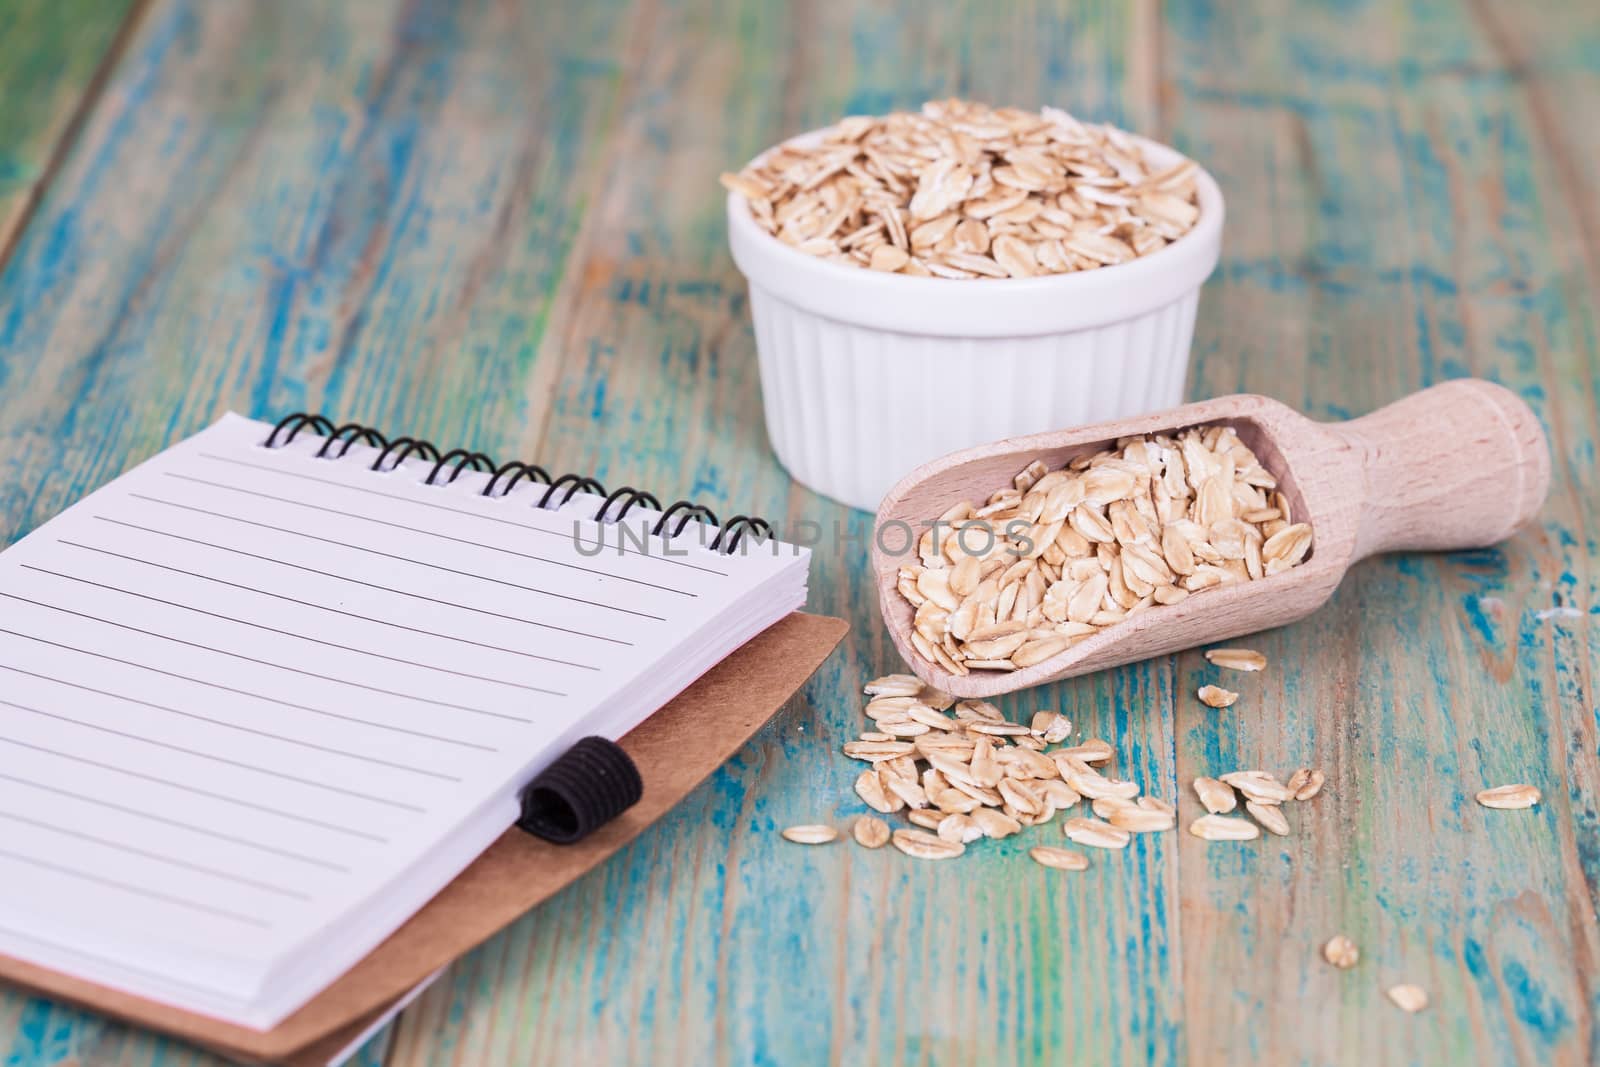 wood spoon with oats flakes pile and book note by amnarj2006